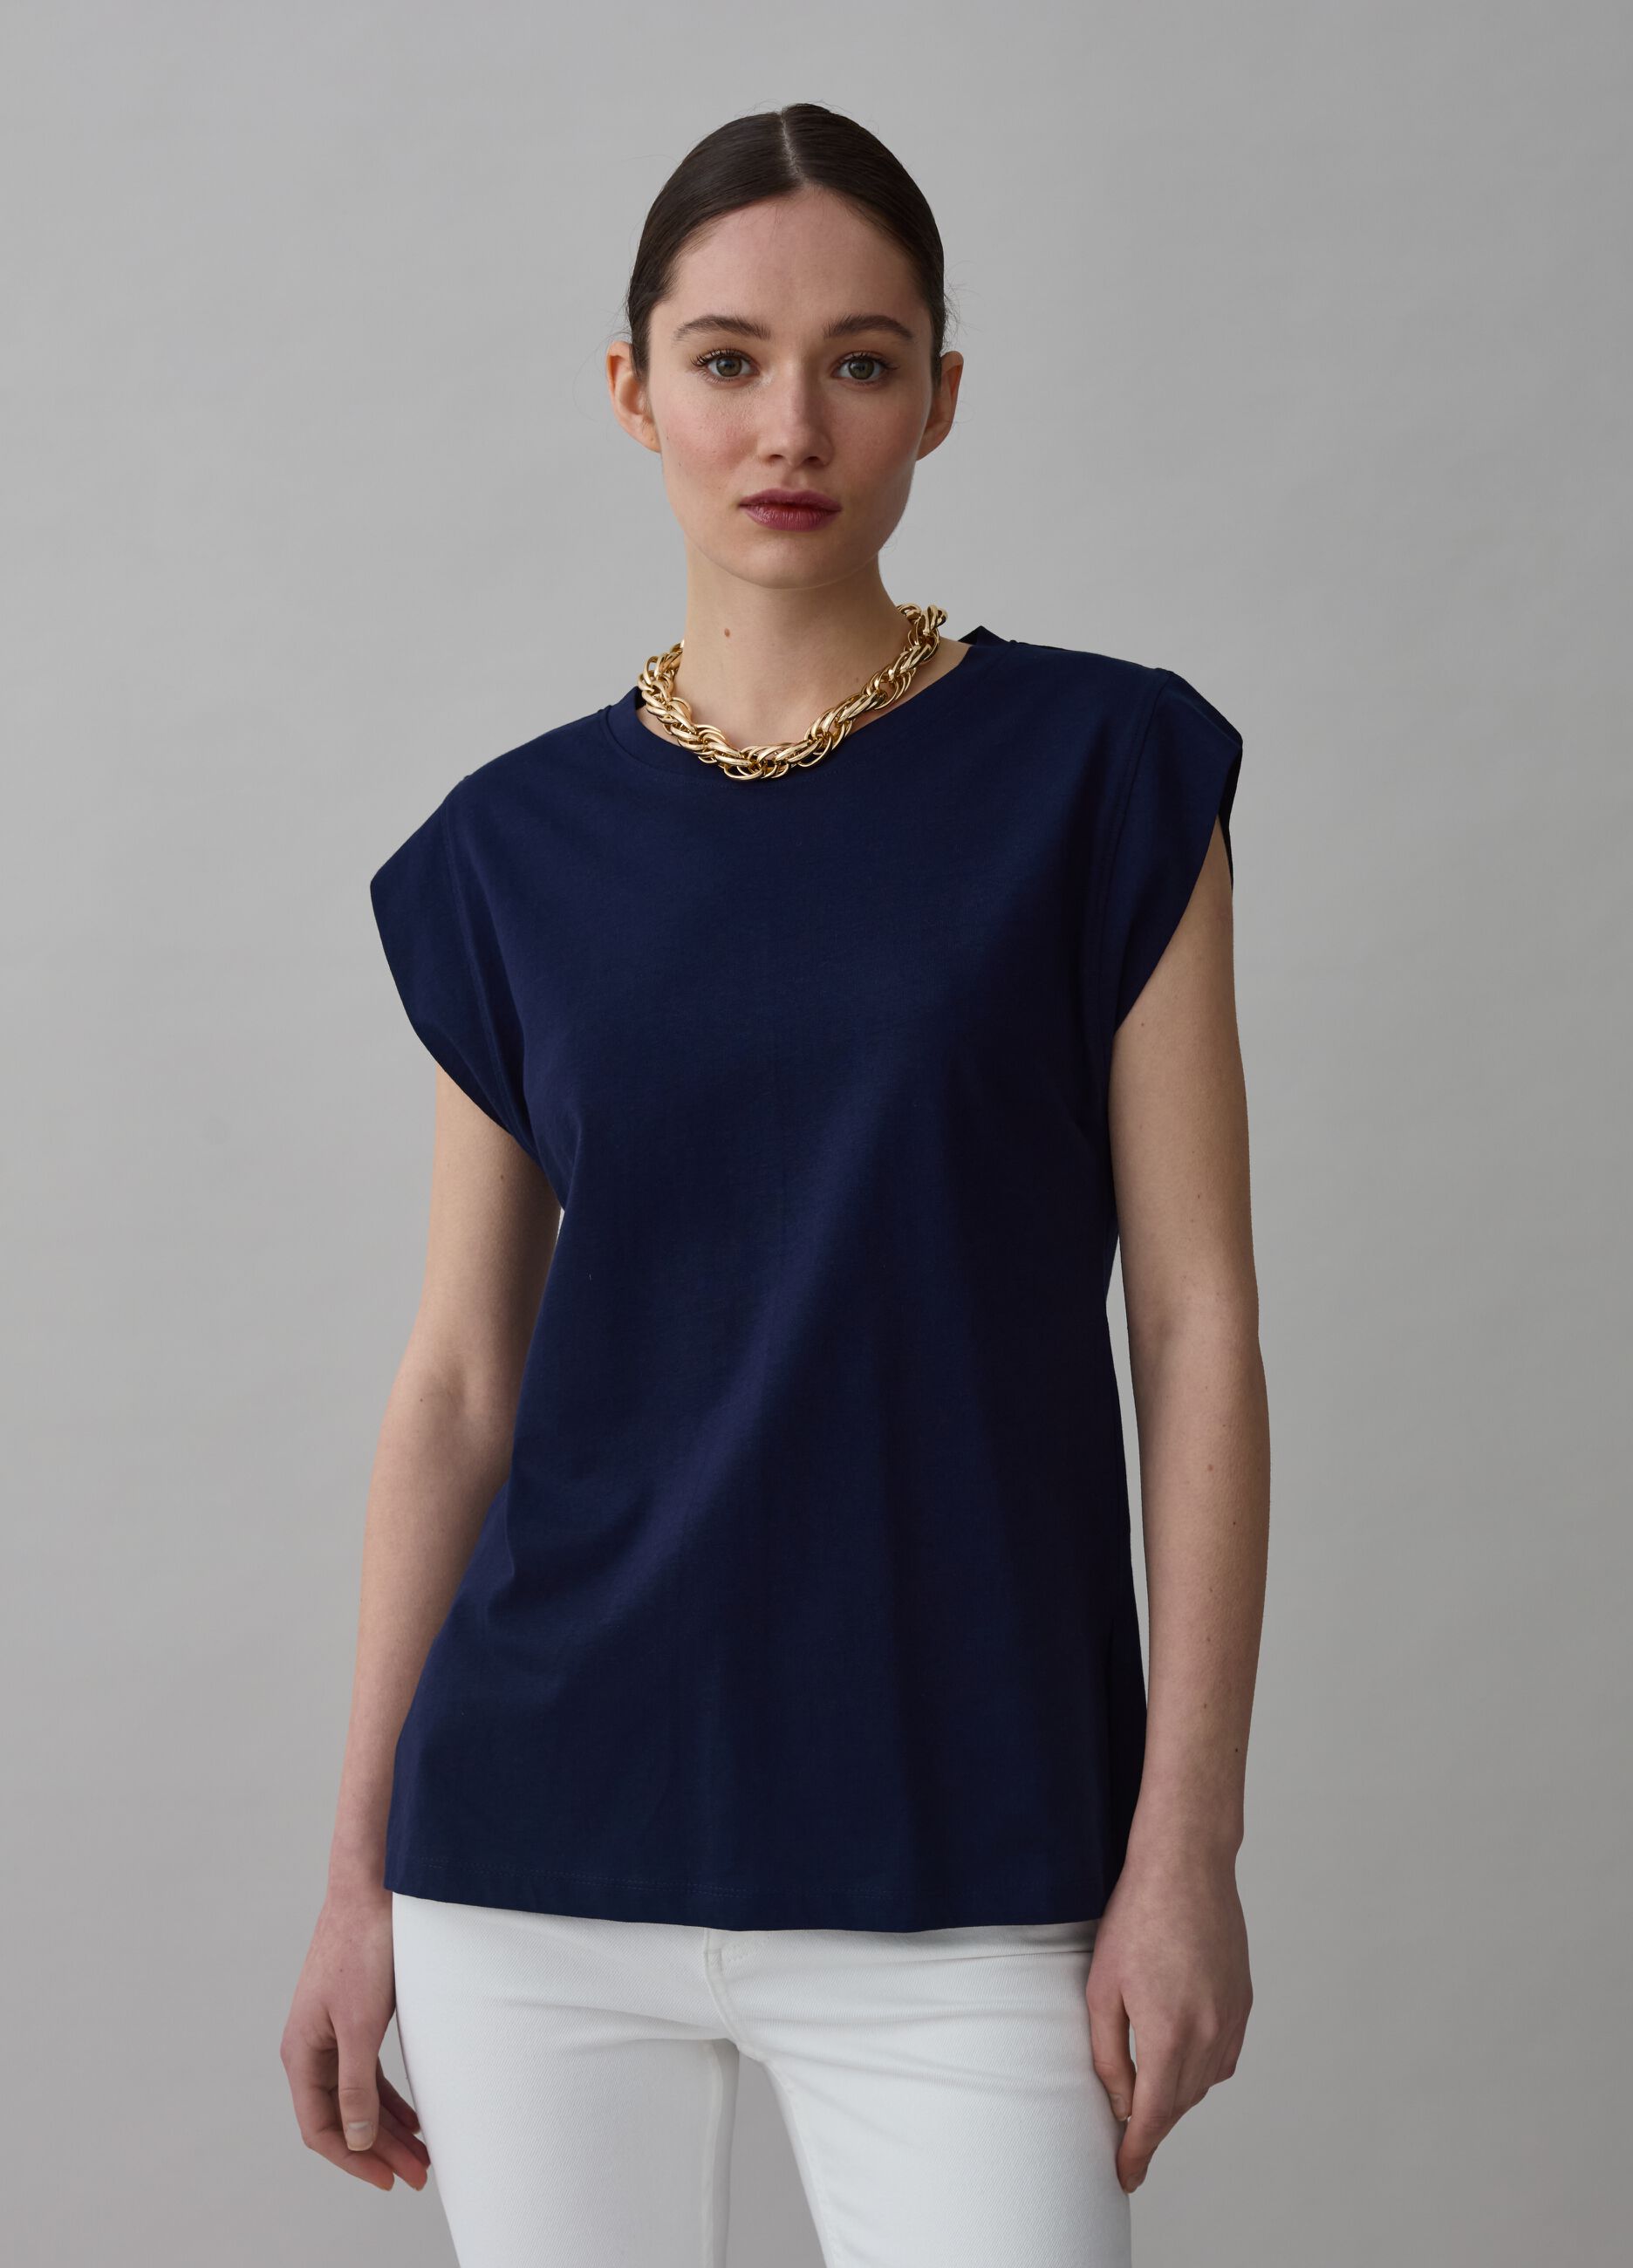 Sleeveless T-shirt with cut-out detail